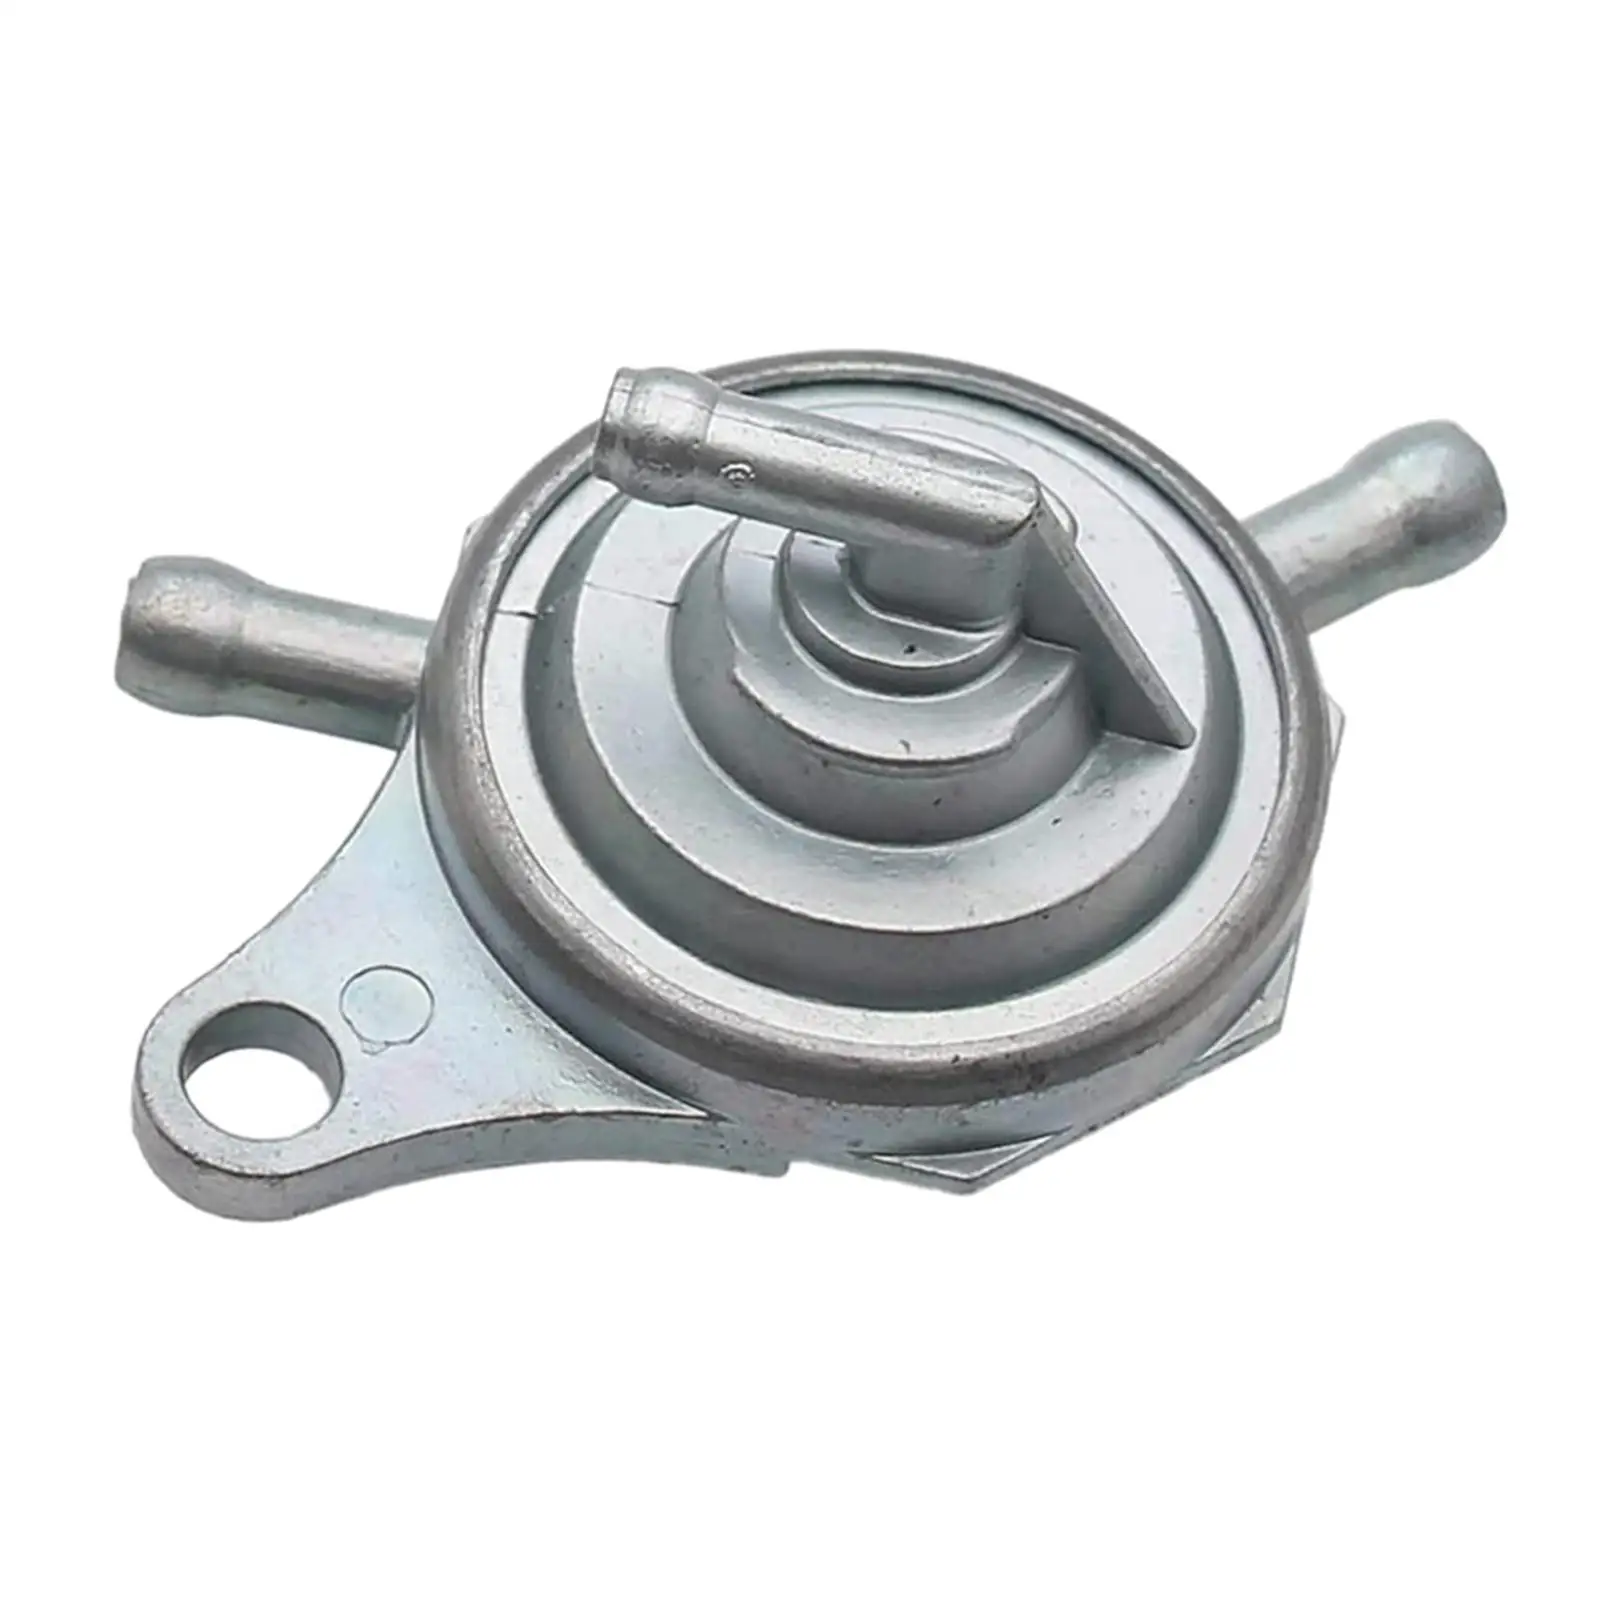 Republe Vacuum Fuel Pump Valve Switch Compatible for GY6 125cc 150cc Moped Scooter ATV Tank Petcock 